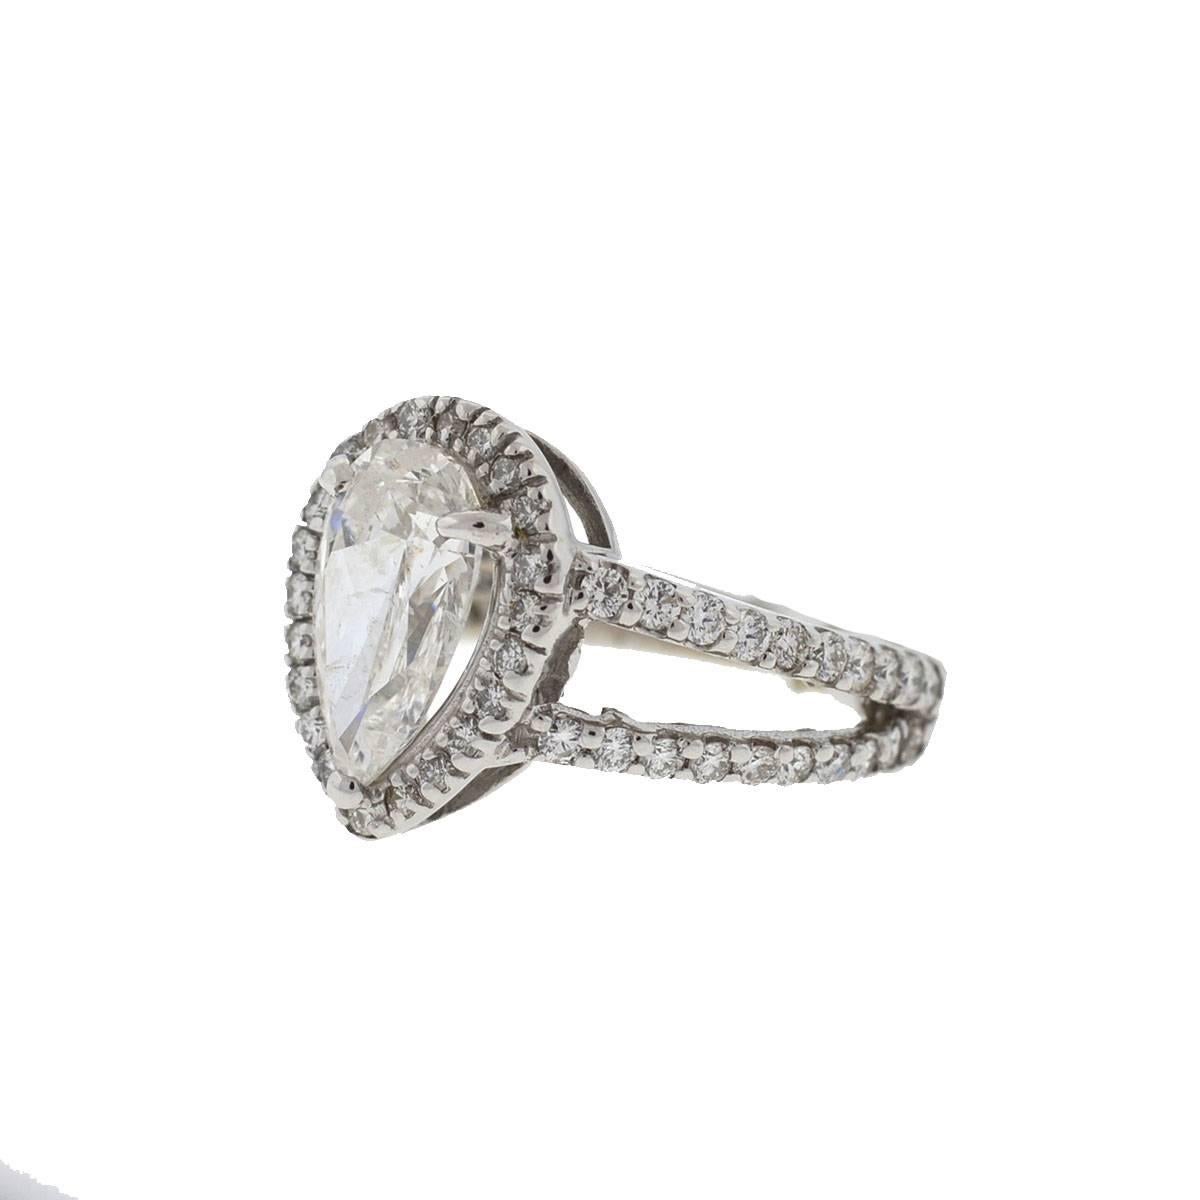 Company-N/A
Style-Pear Shape Two Row Diamond Engagement Ring
Metal-14k White Gold
Size- 6.25
Weight-6.355 grams
Stones-Diamonds Approx. - Center-Pear Shape 2Cts
Sku : 1256MEE S-6.25 8811-1TMEE